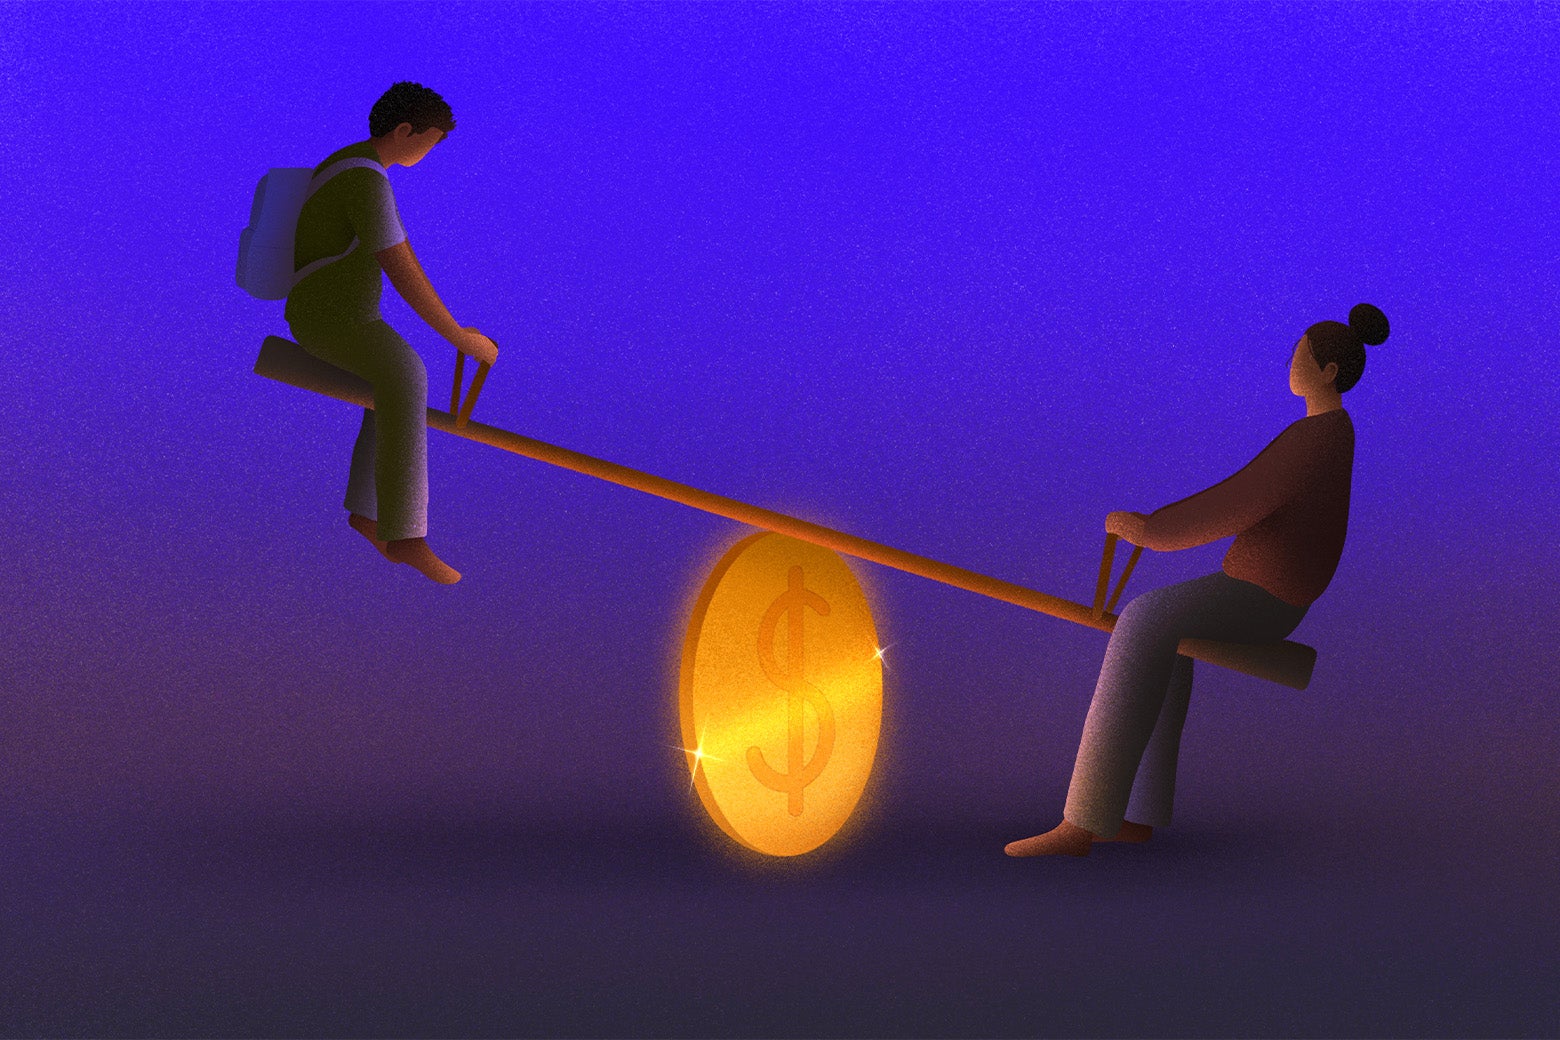 A child wearing a backpack is on the high side of a teeter-totter made of a gold coin while a woman is down. 